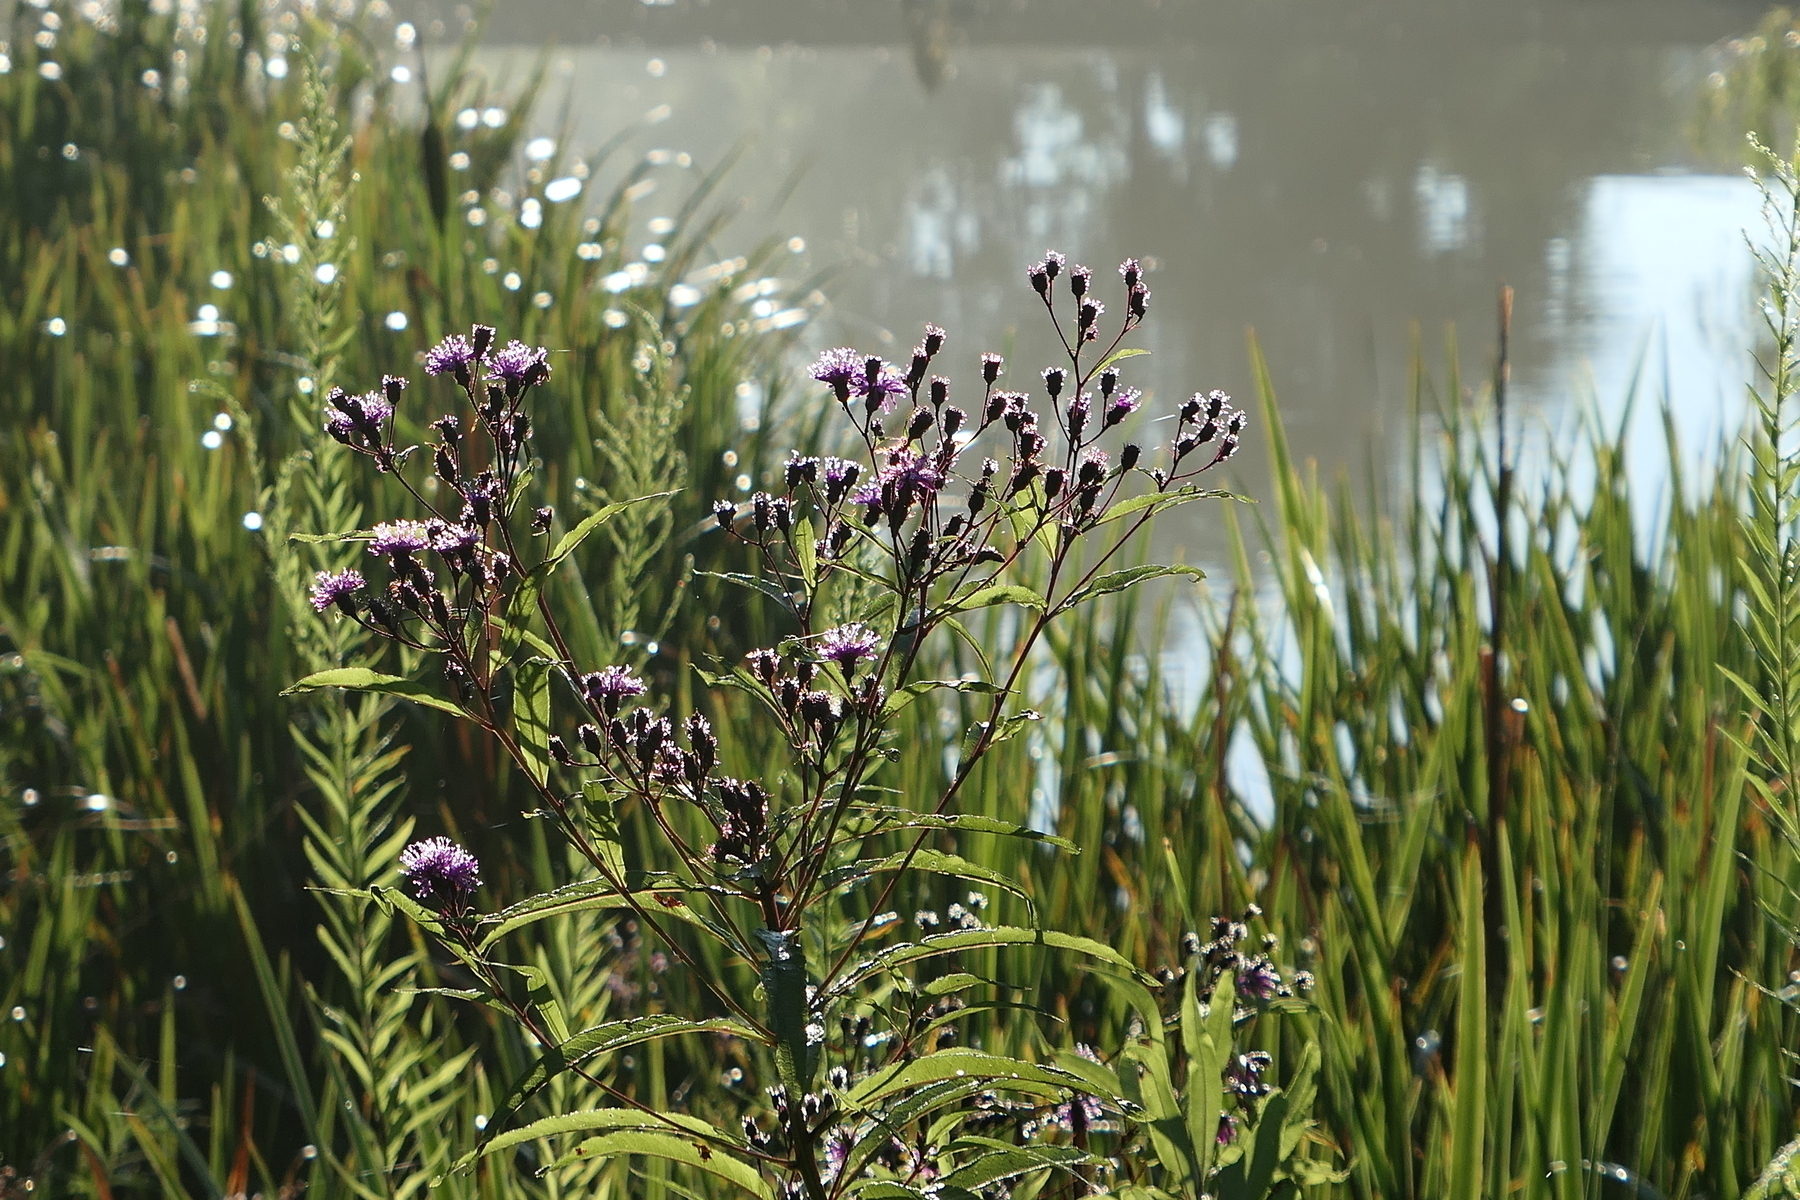 purple asters, I think, and cattails by the water, lit by morning sun